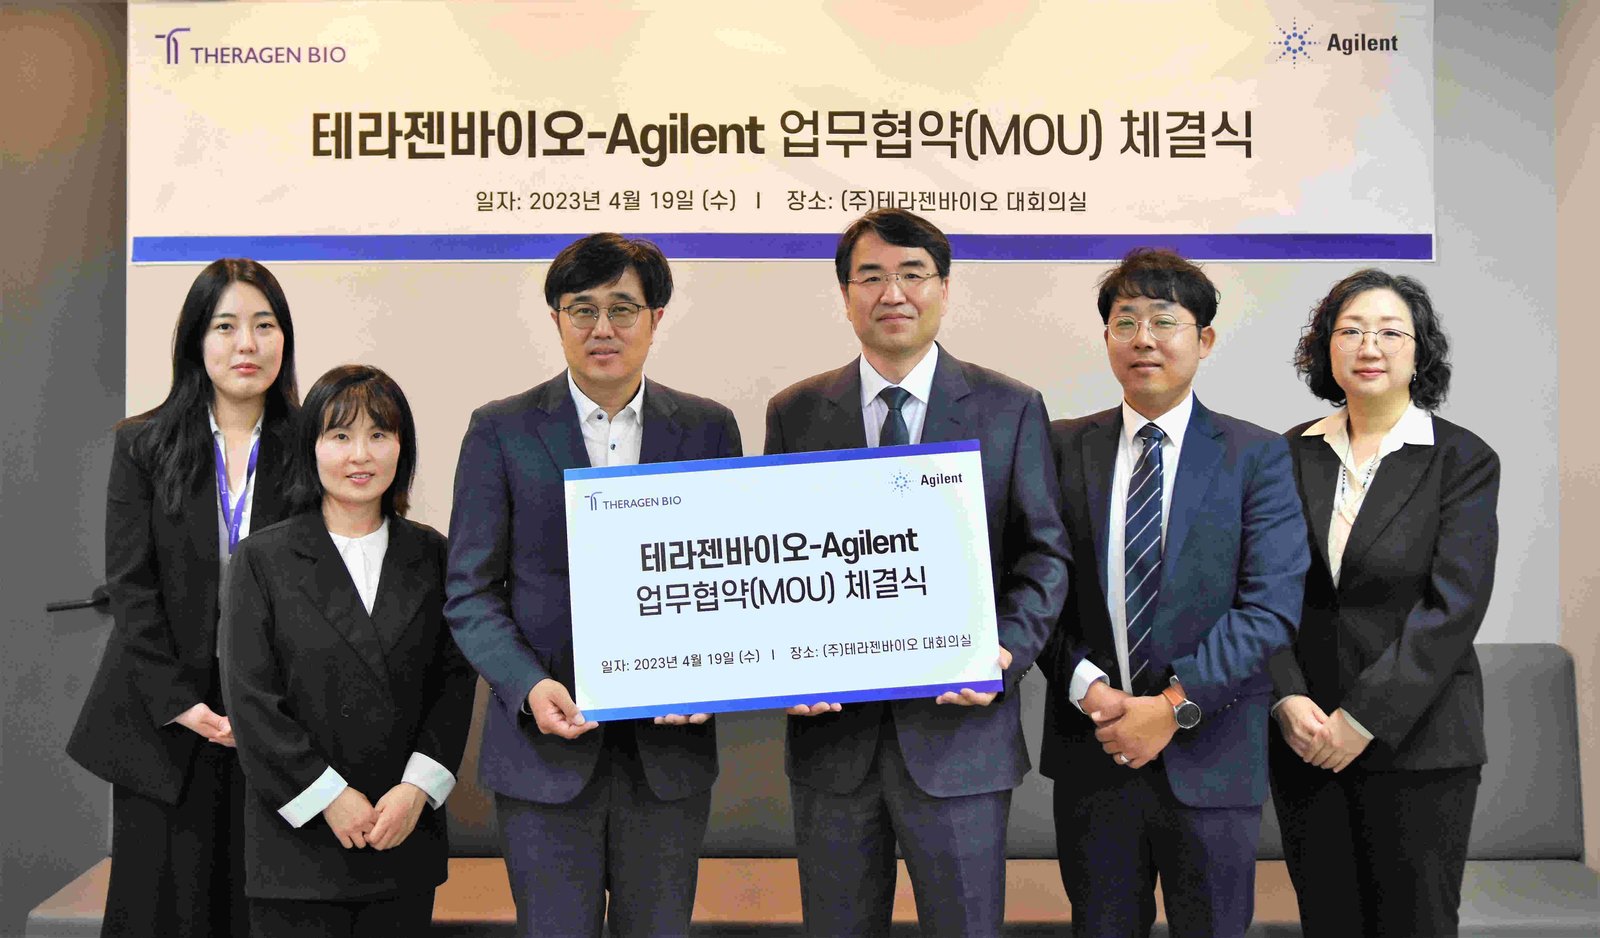 Representatives from Agilent Korea and Theragen Bio during the MOU signing ceremony in Seoul, South Korea. 